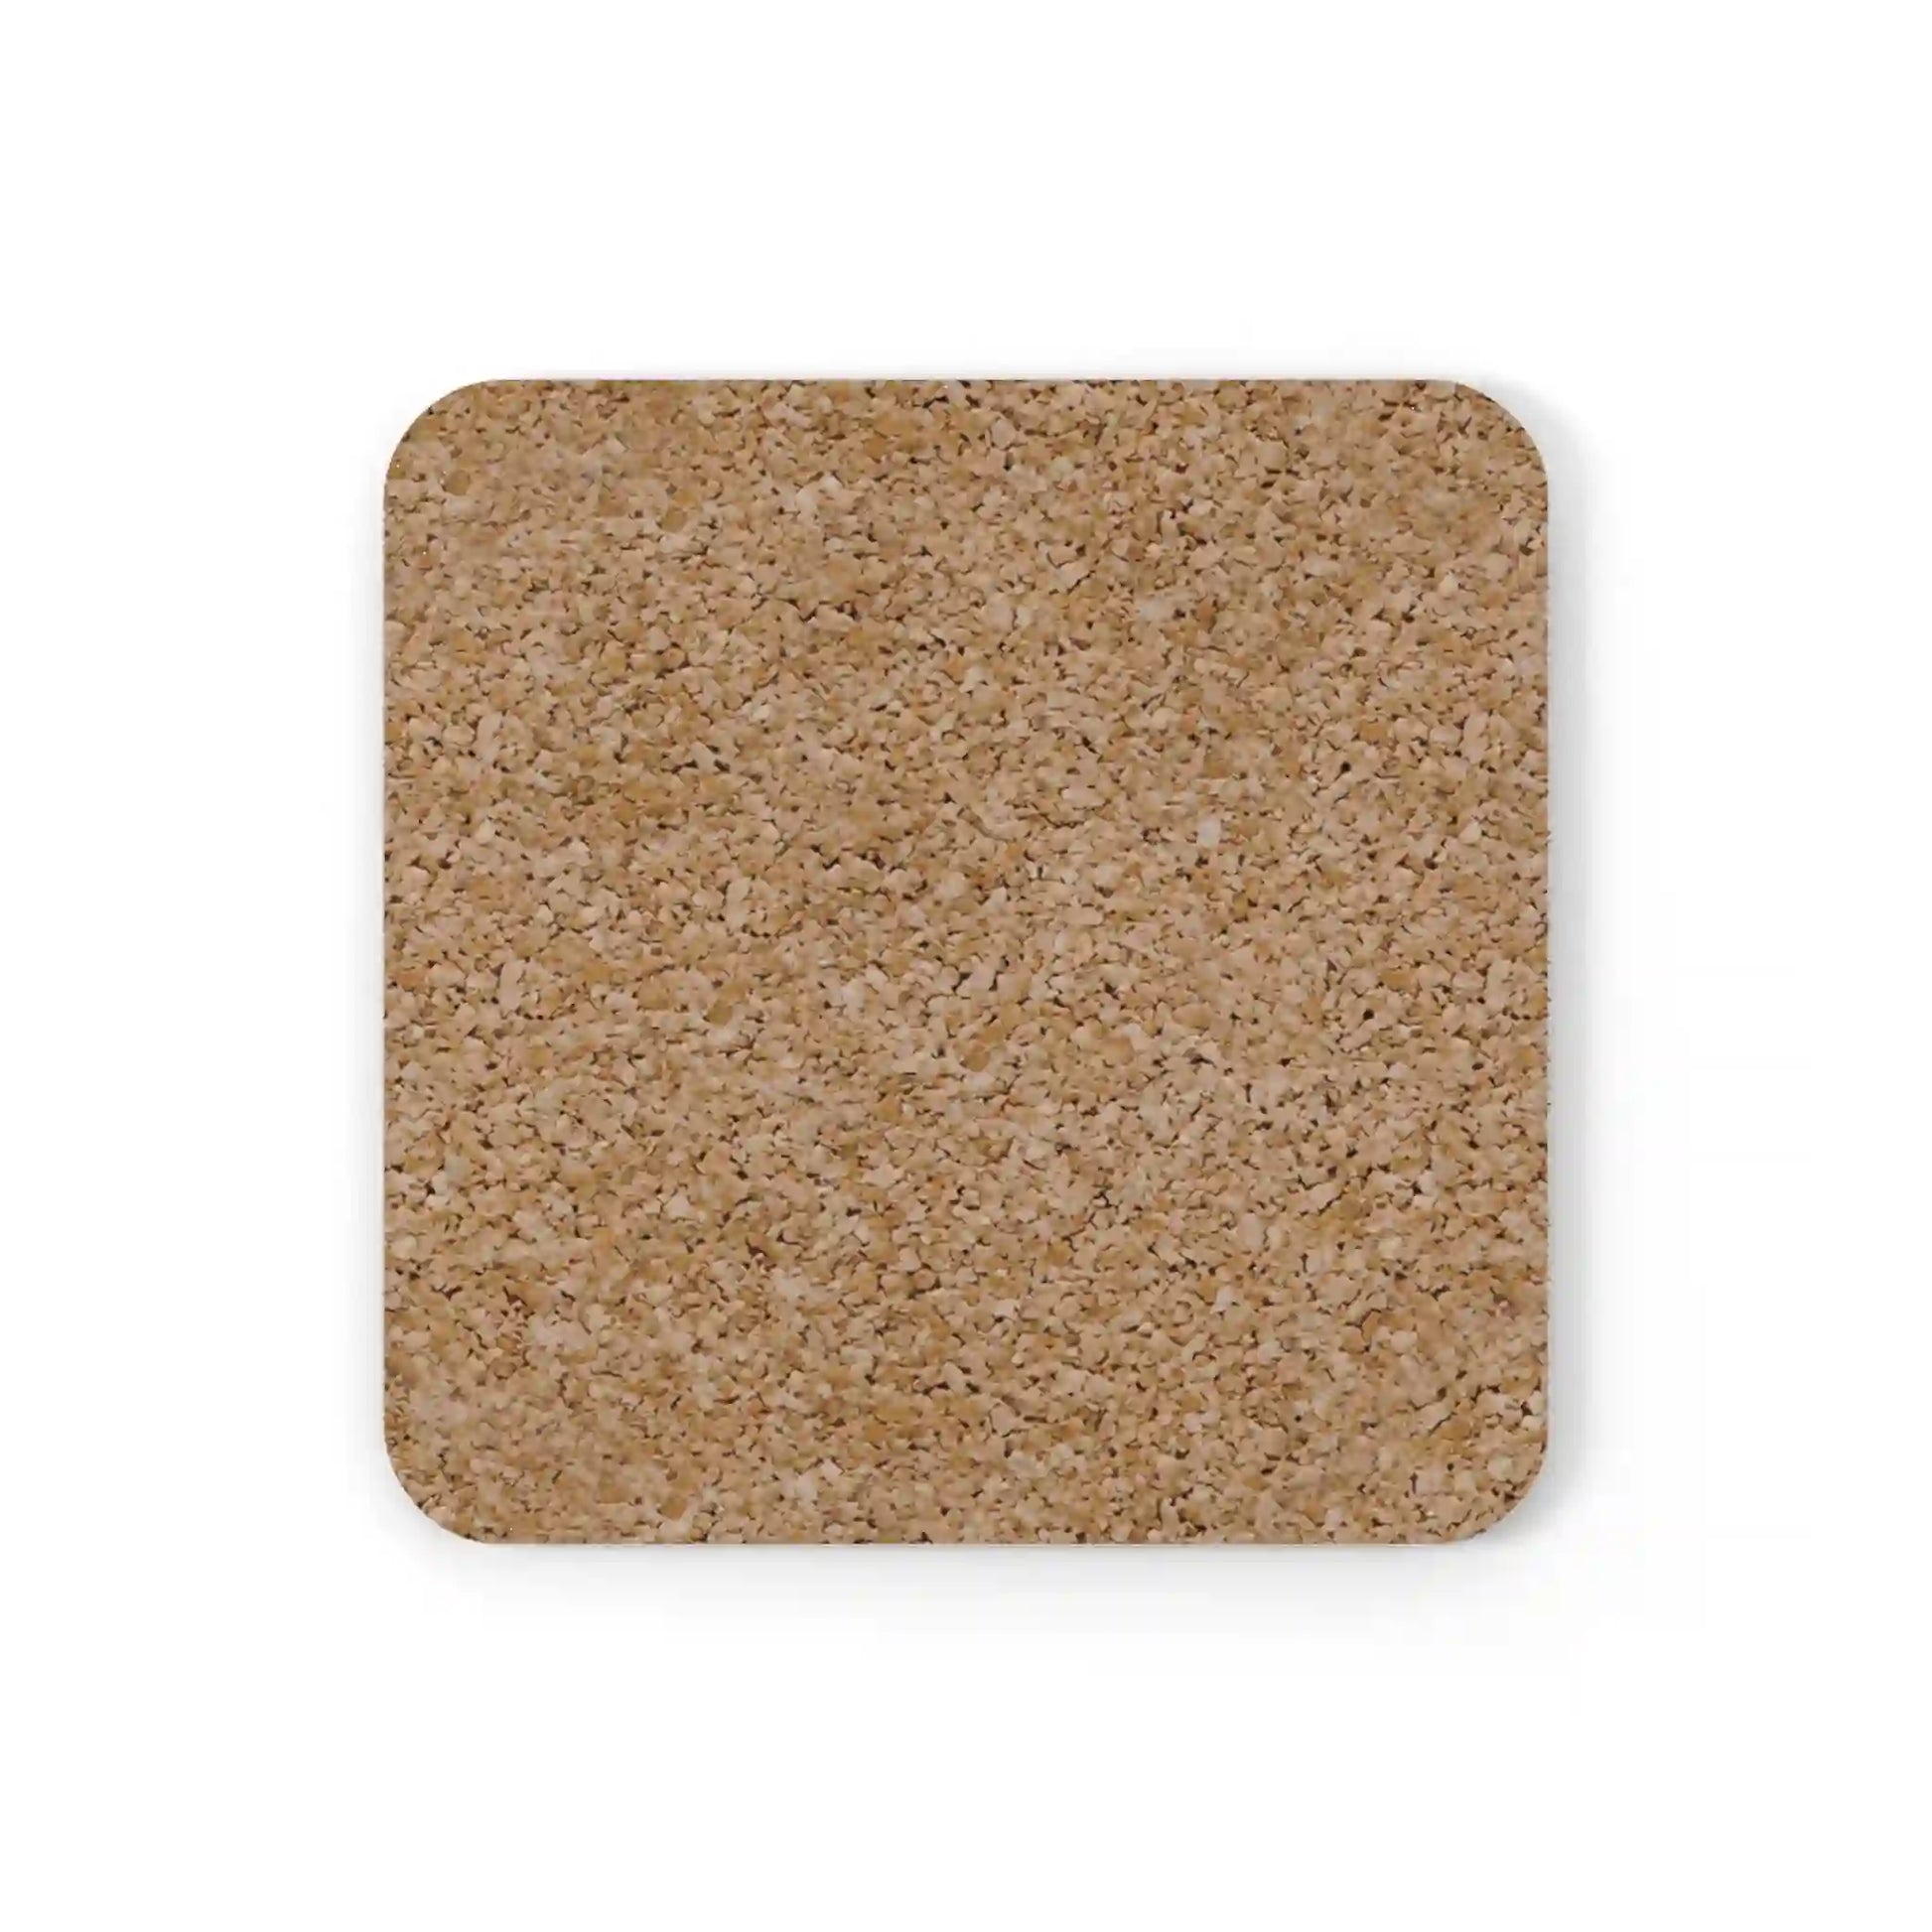 Non-slip premium cork coaster, furniture protection (This is my happy face)